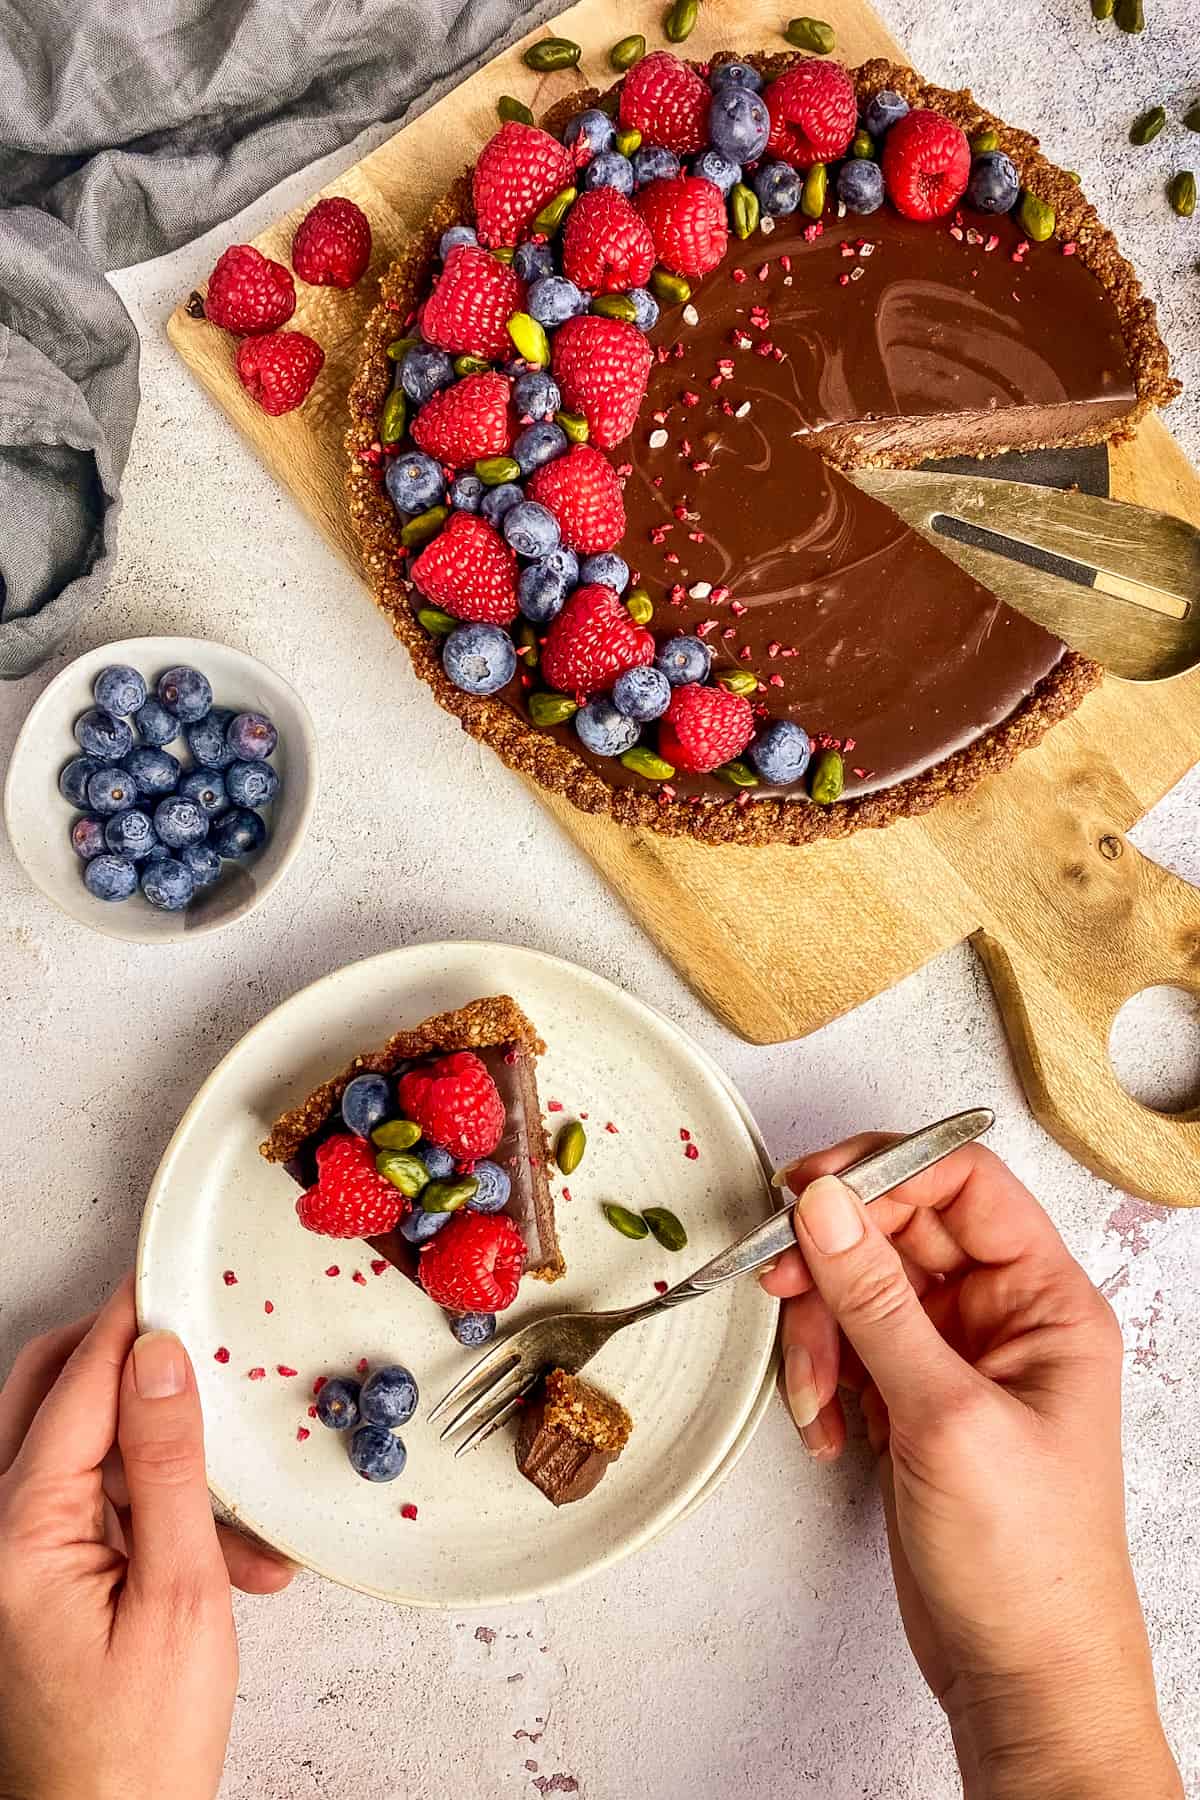 Vegan chocolate tart with berries on a cutting board next to a plate with a slice of the tart and two hands.